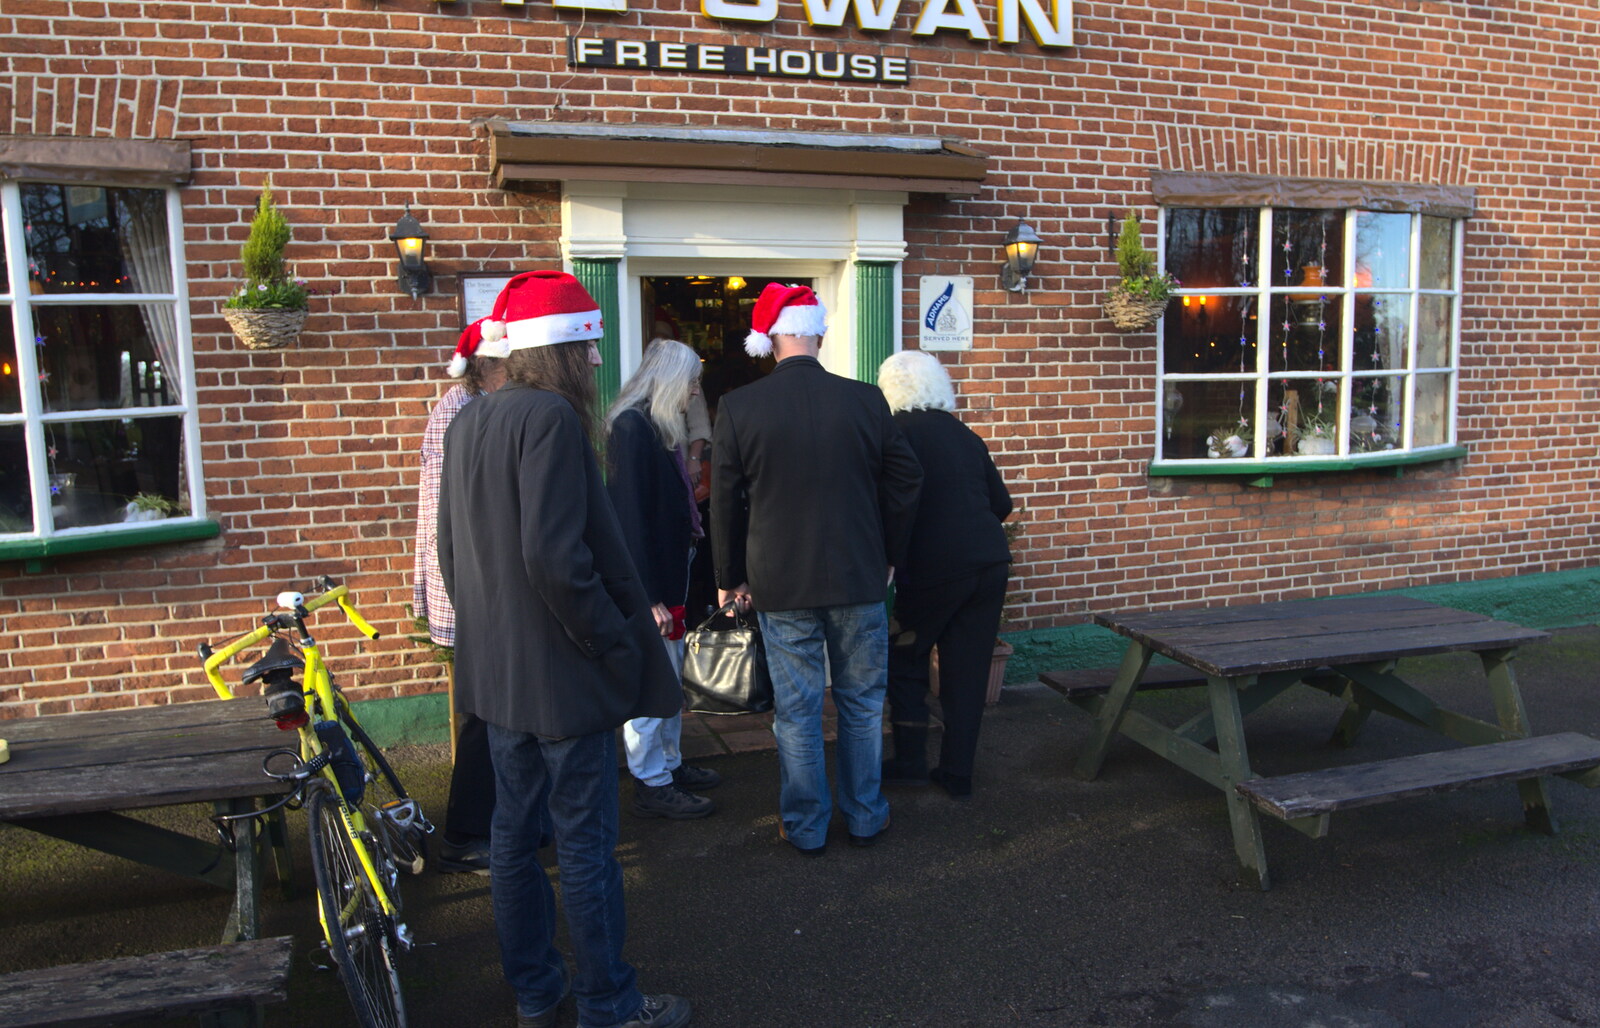 People with Santa hats on their way in from Christmas Day and all that, Brome, Suffolk - 25th December 2013